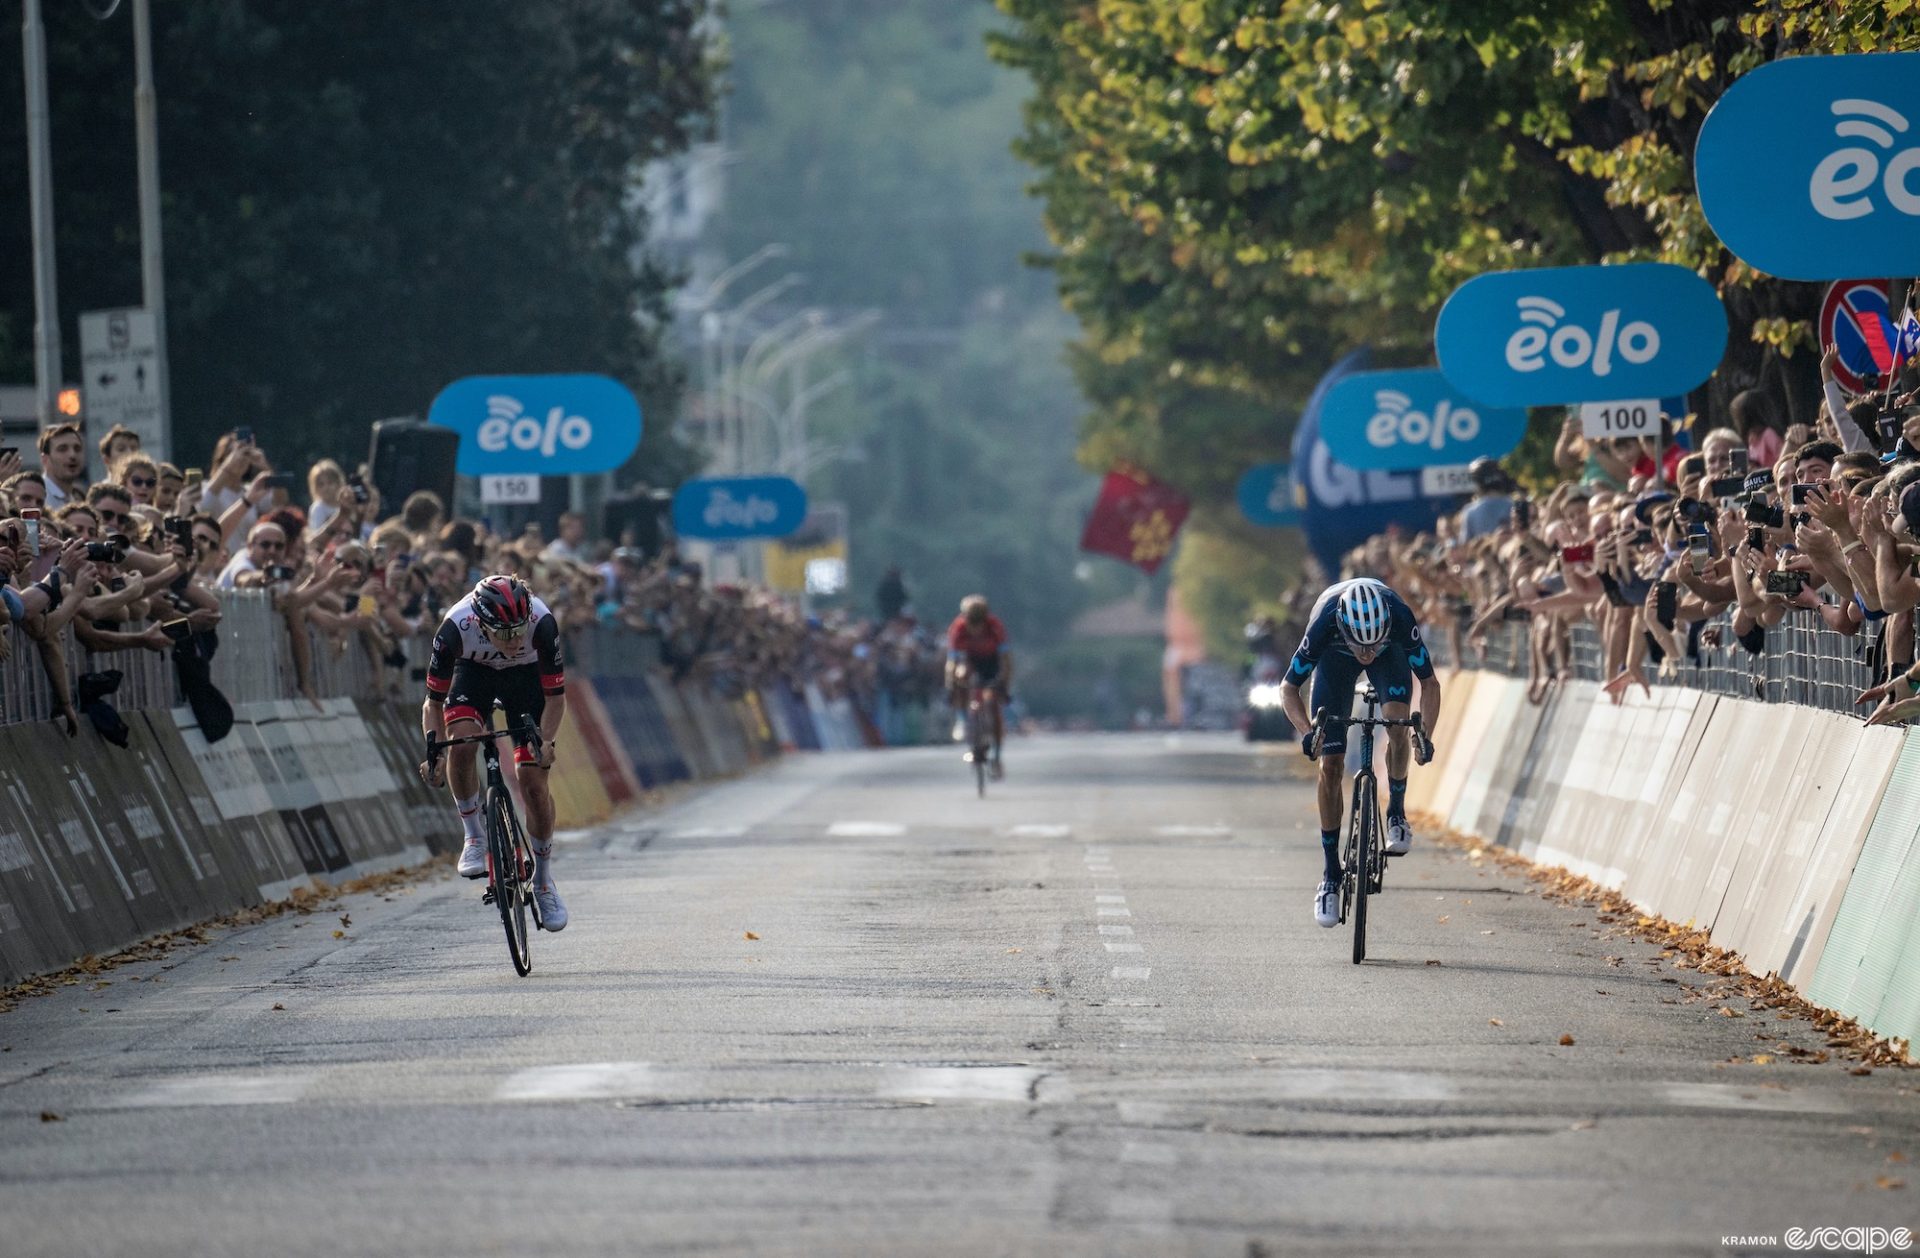 Tadej Pogačar sprinting against Enric Mas in the finale of the 2022 Il Lombardia. They're on opposite sides of the road and Pogačar is looking slightly across at his rival.